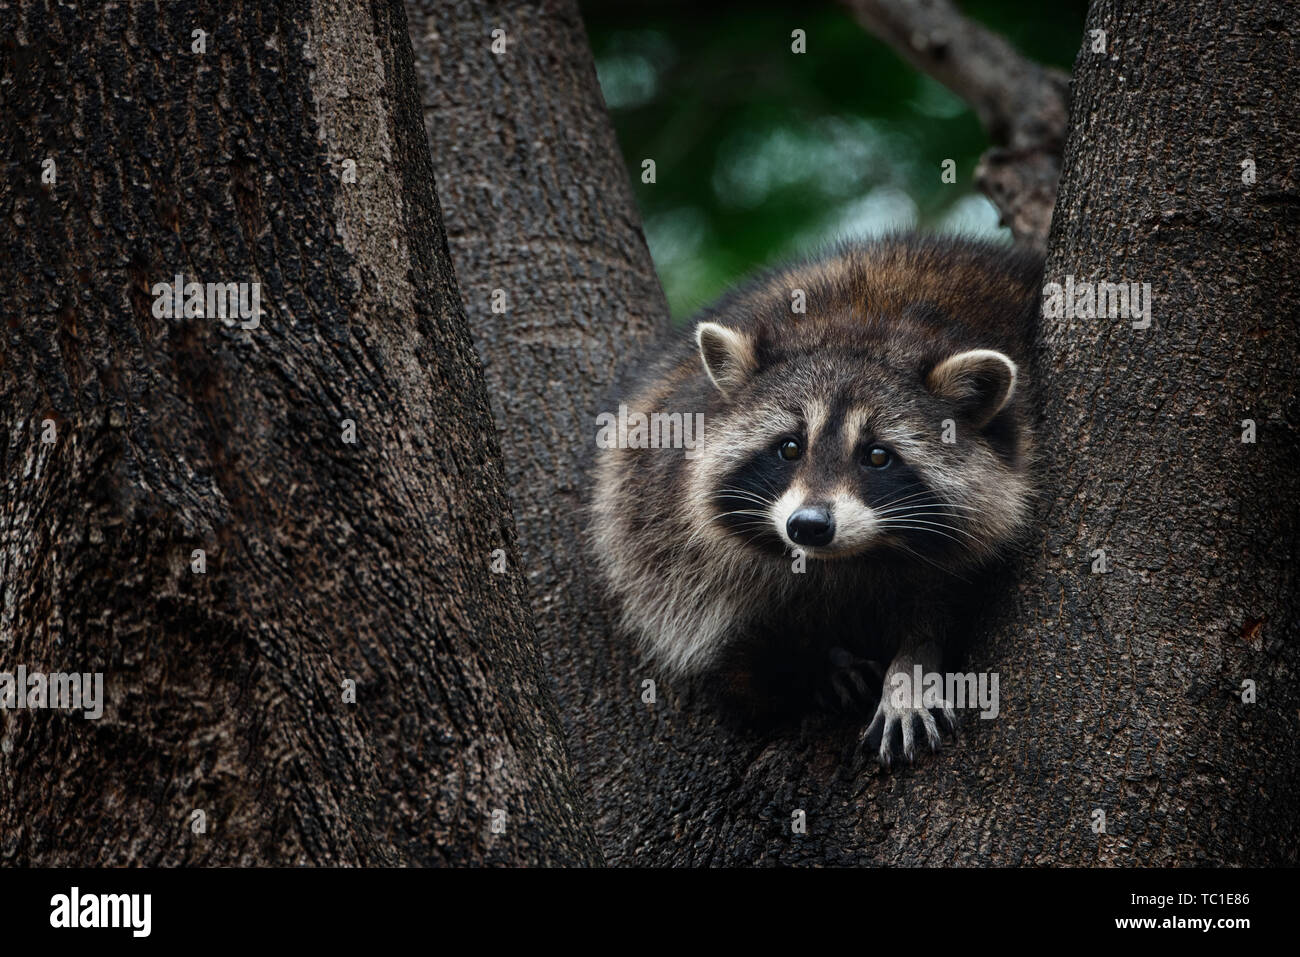 Common Raccoon in tree, Sterling Heights, Michigan Stock Photo